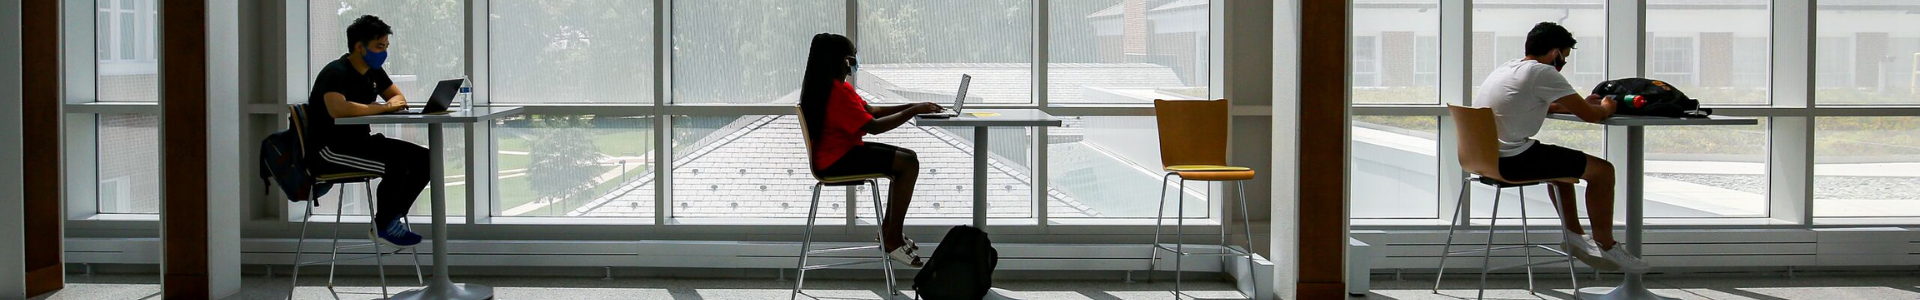 three students sit at desks in front of window